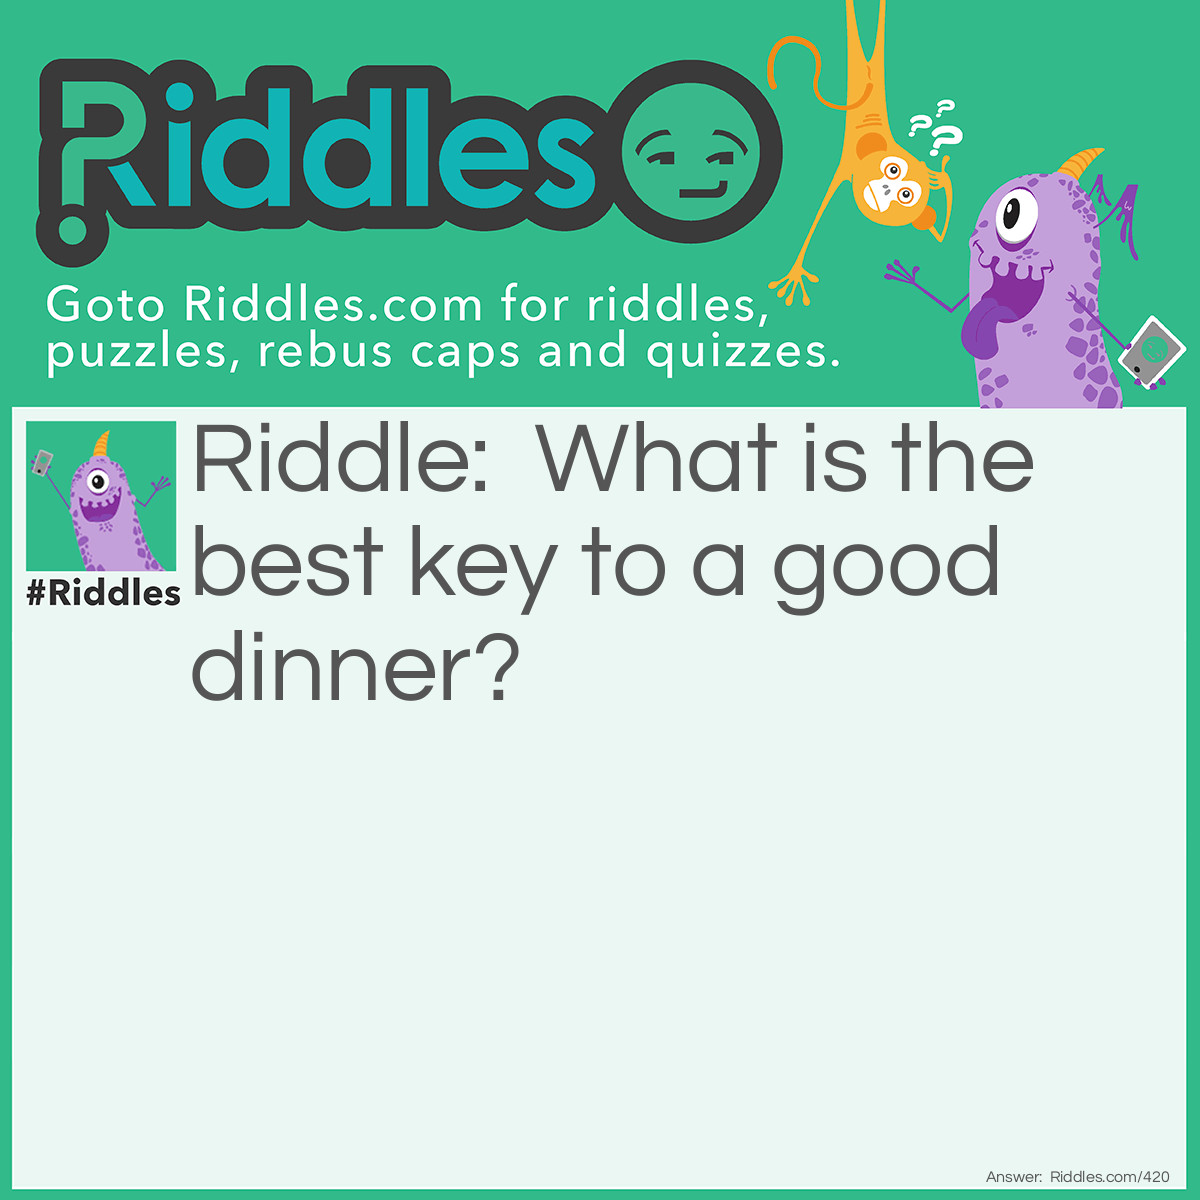 Riddle: What is the best key to a good dinner? Answer: A tur-key.